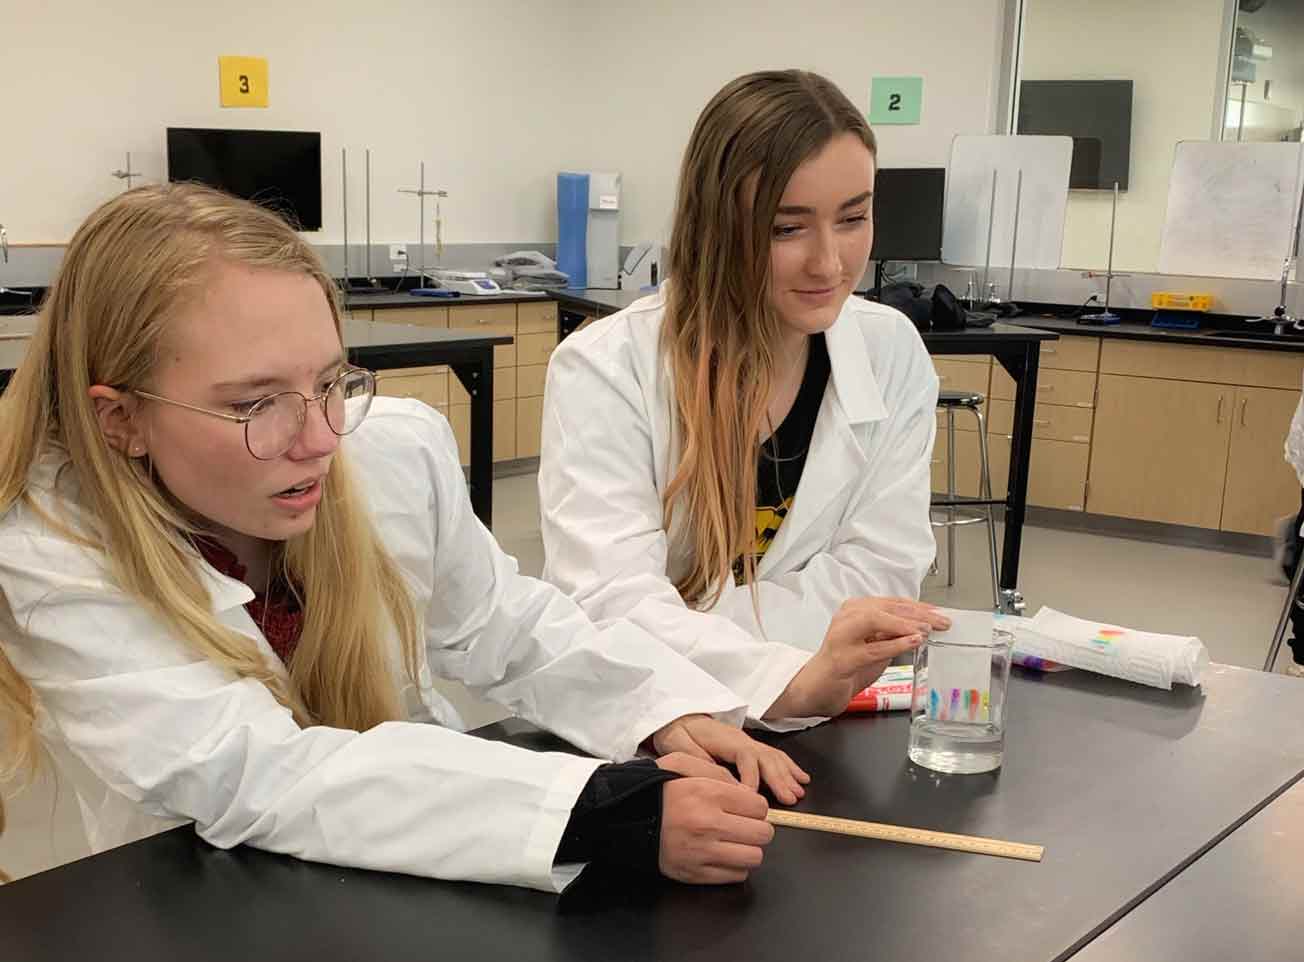 Two high schoolers doing a science experiment.